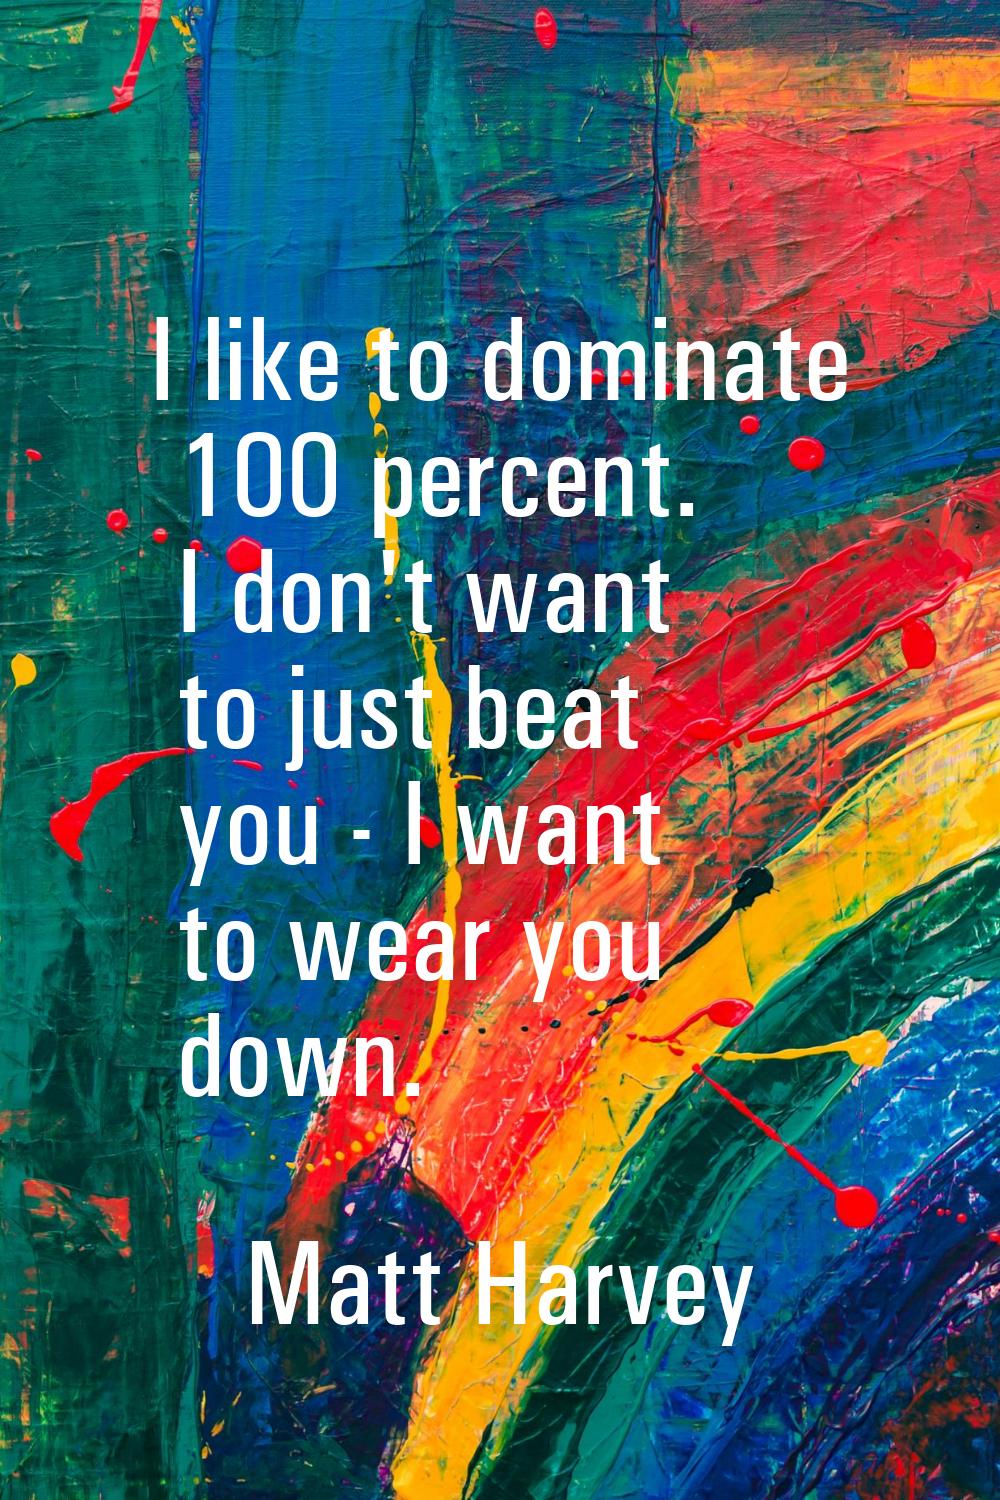 I like to dominate 100 percent. I don't want to just beat you - I want to wear you down.